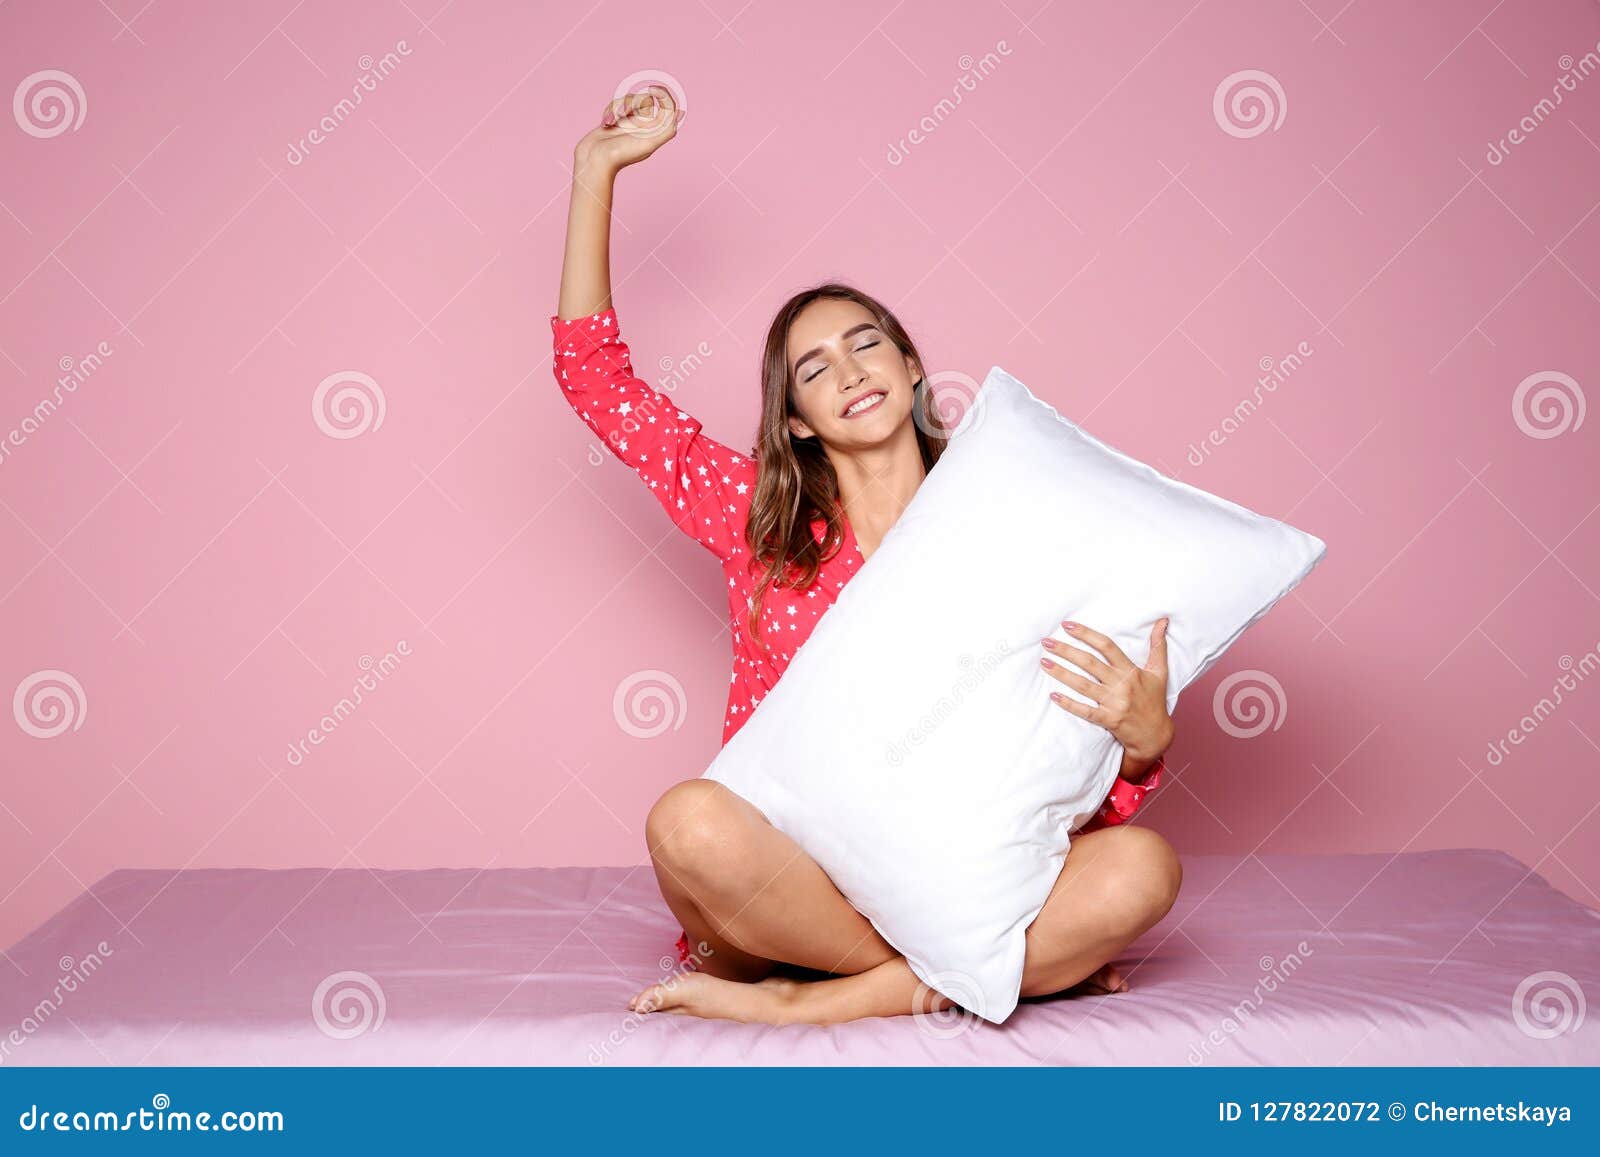 Beautiful Teen Girl Hugging Pillow On Bed Stock Photo Image Of